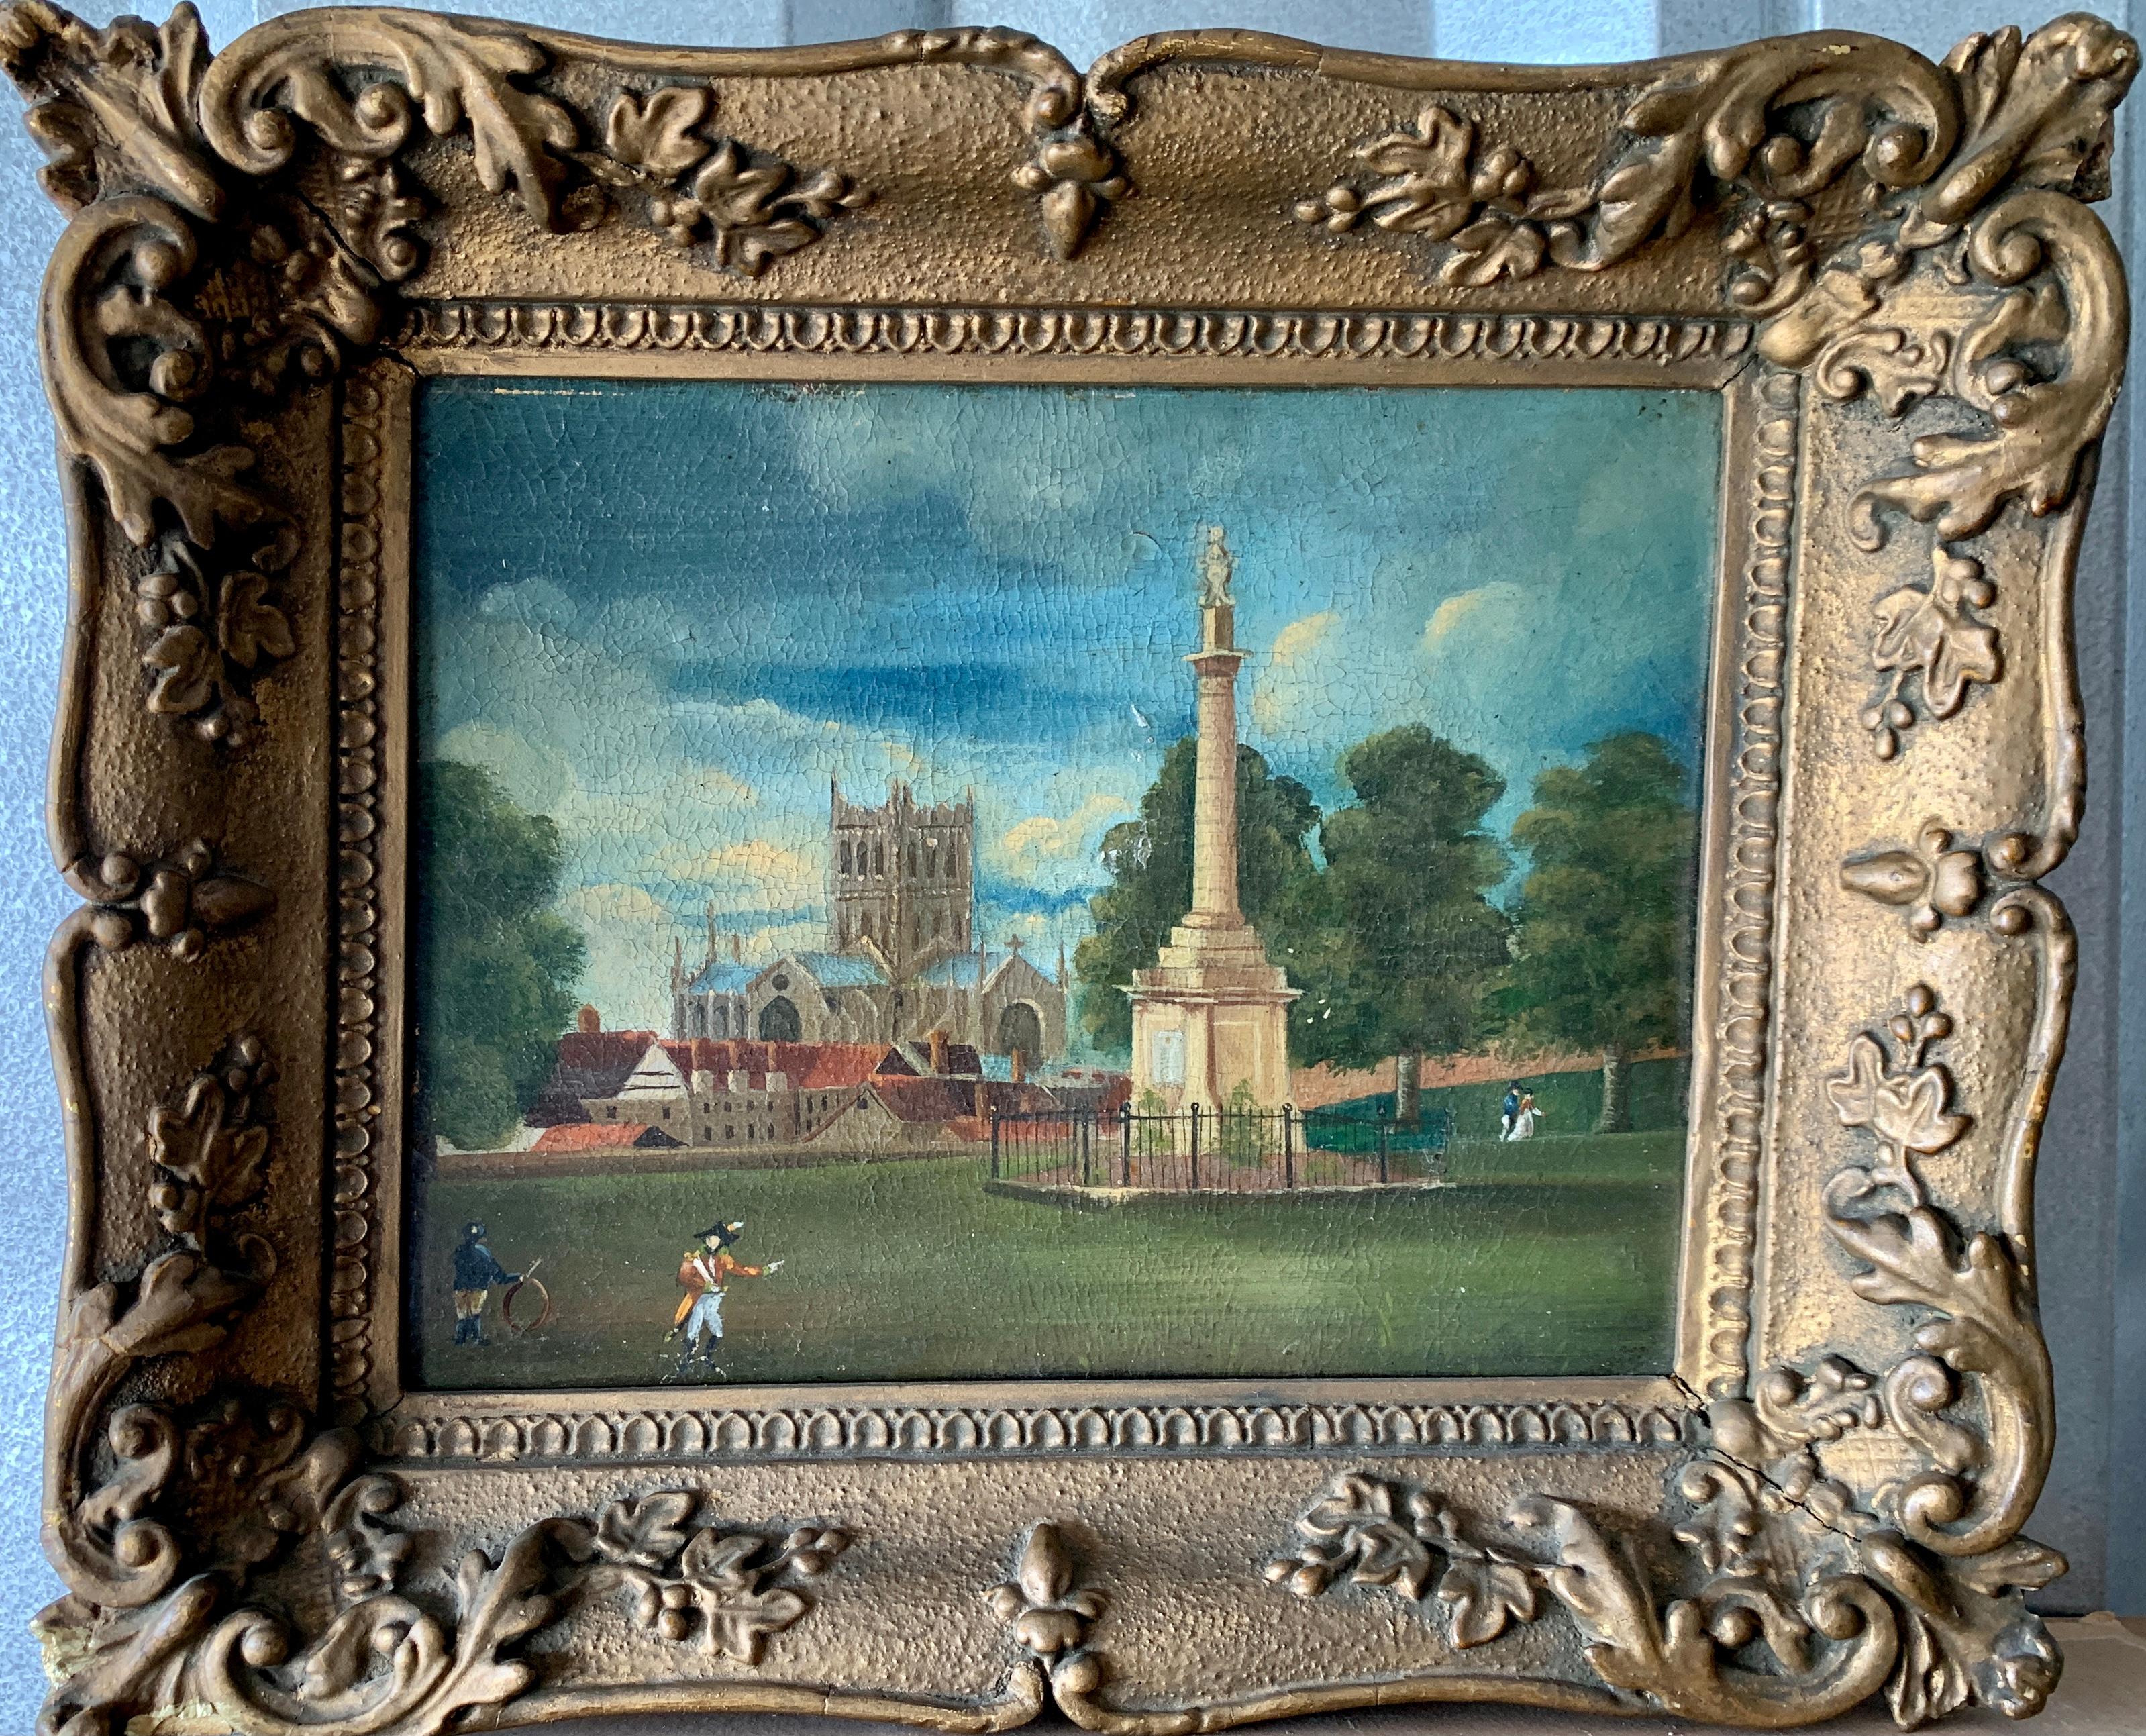 19th century English folk art, Town scene with soldier my a monument and church